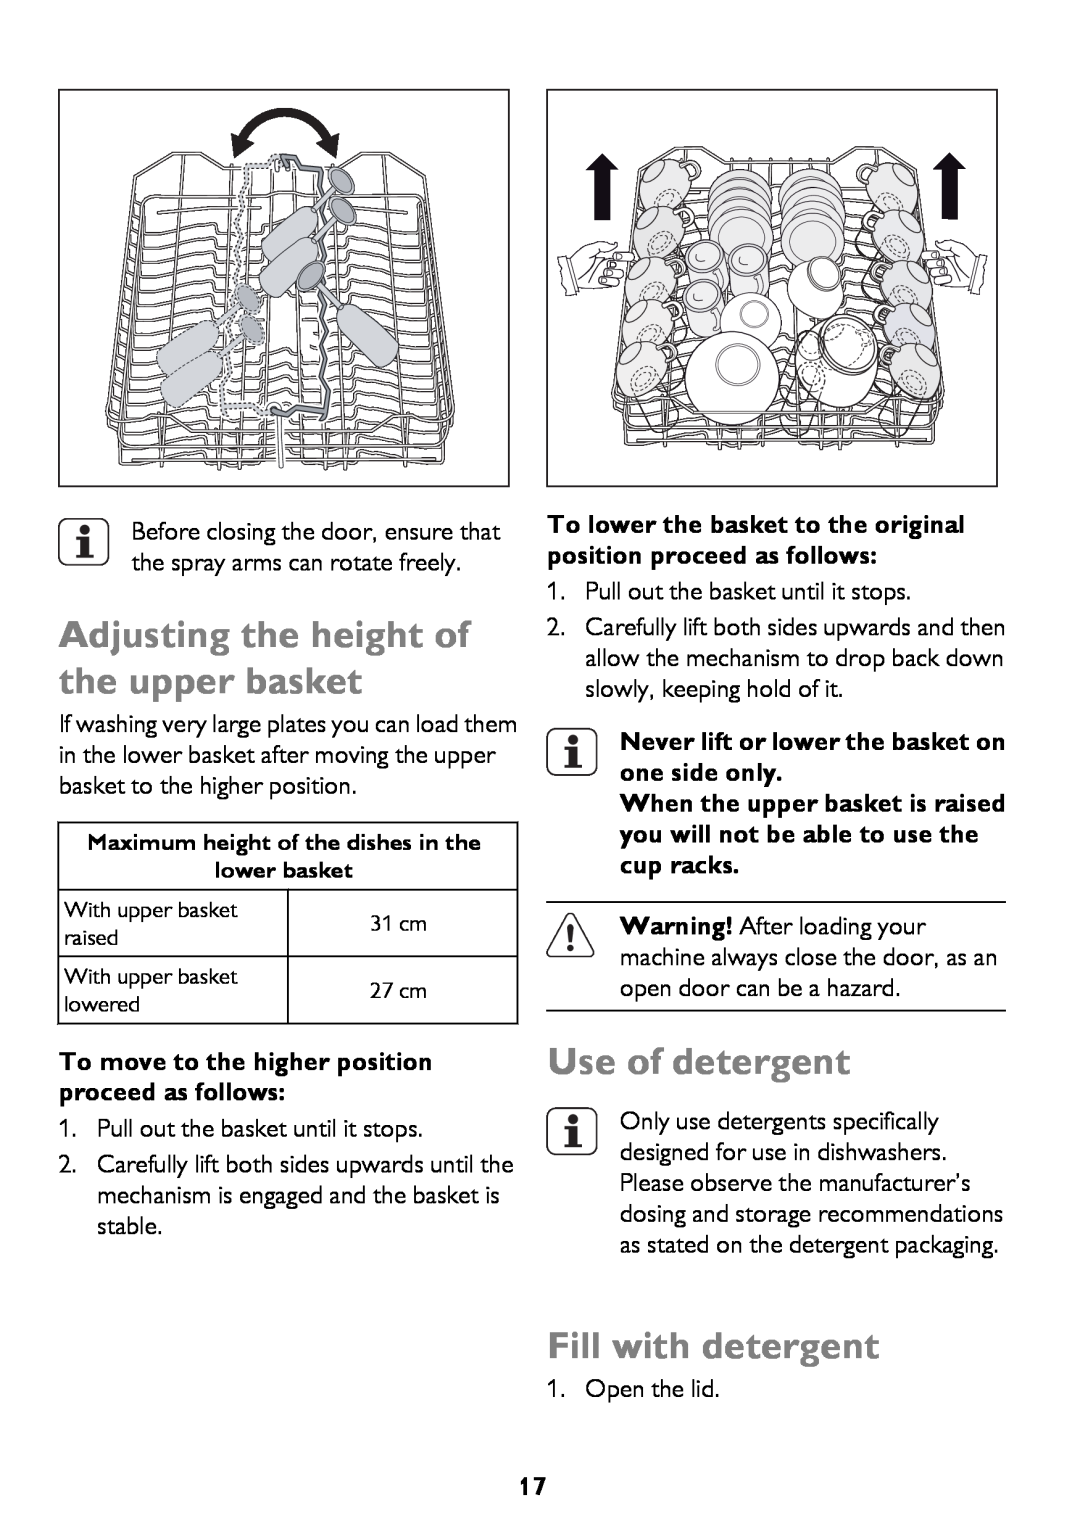 John Lewis JLDWW 1206 instruction manual Adjusting the height of the upper basket, Use of detergent, Fill with detergent 